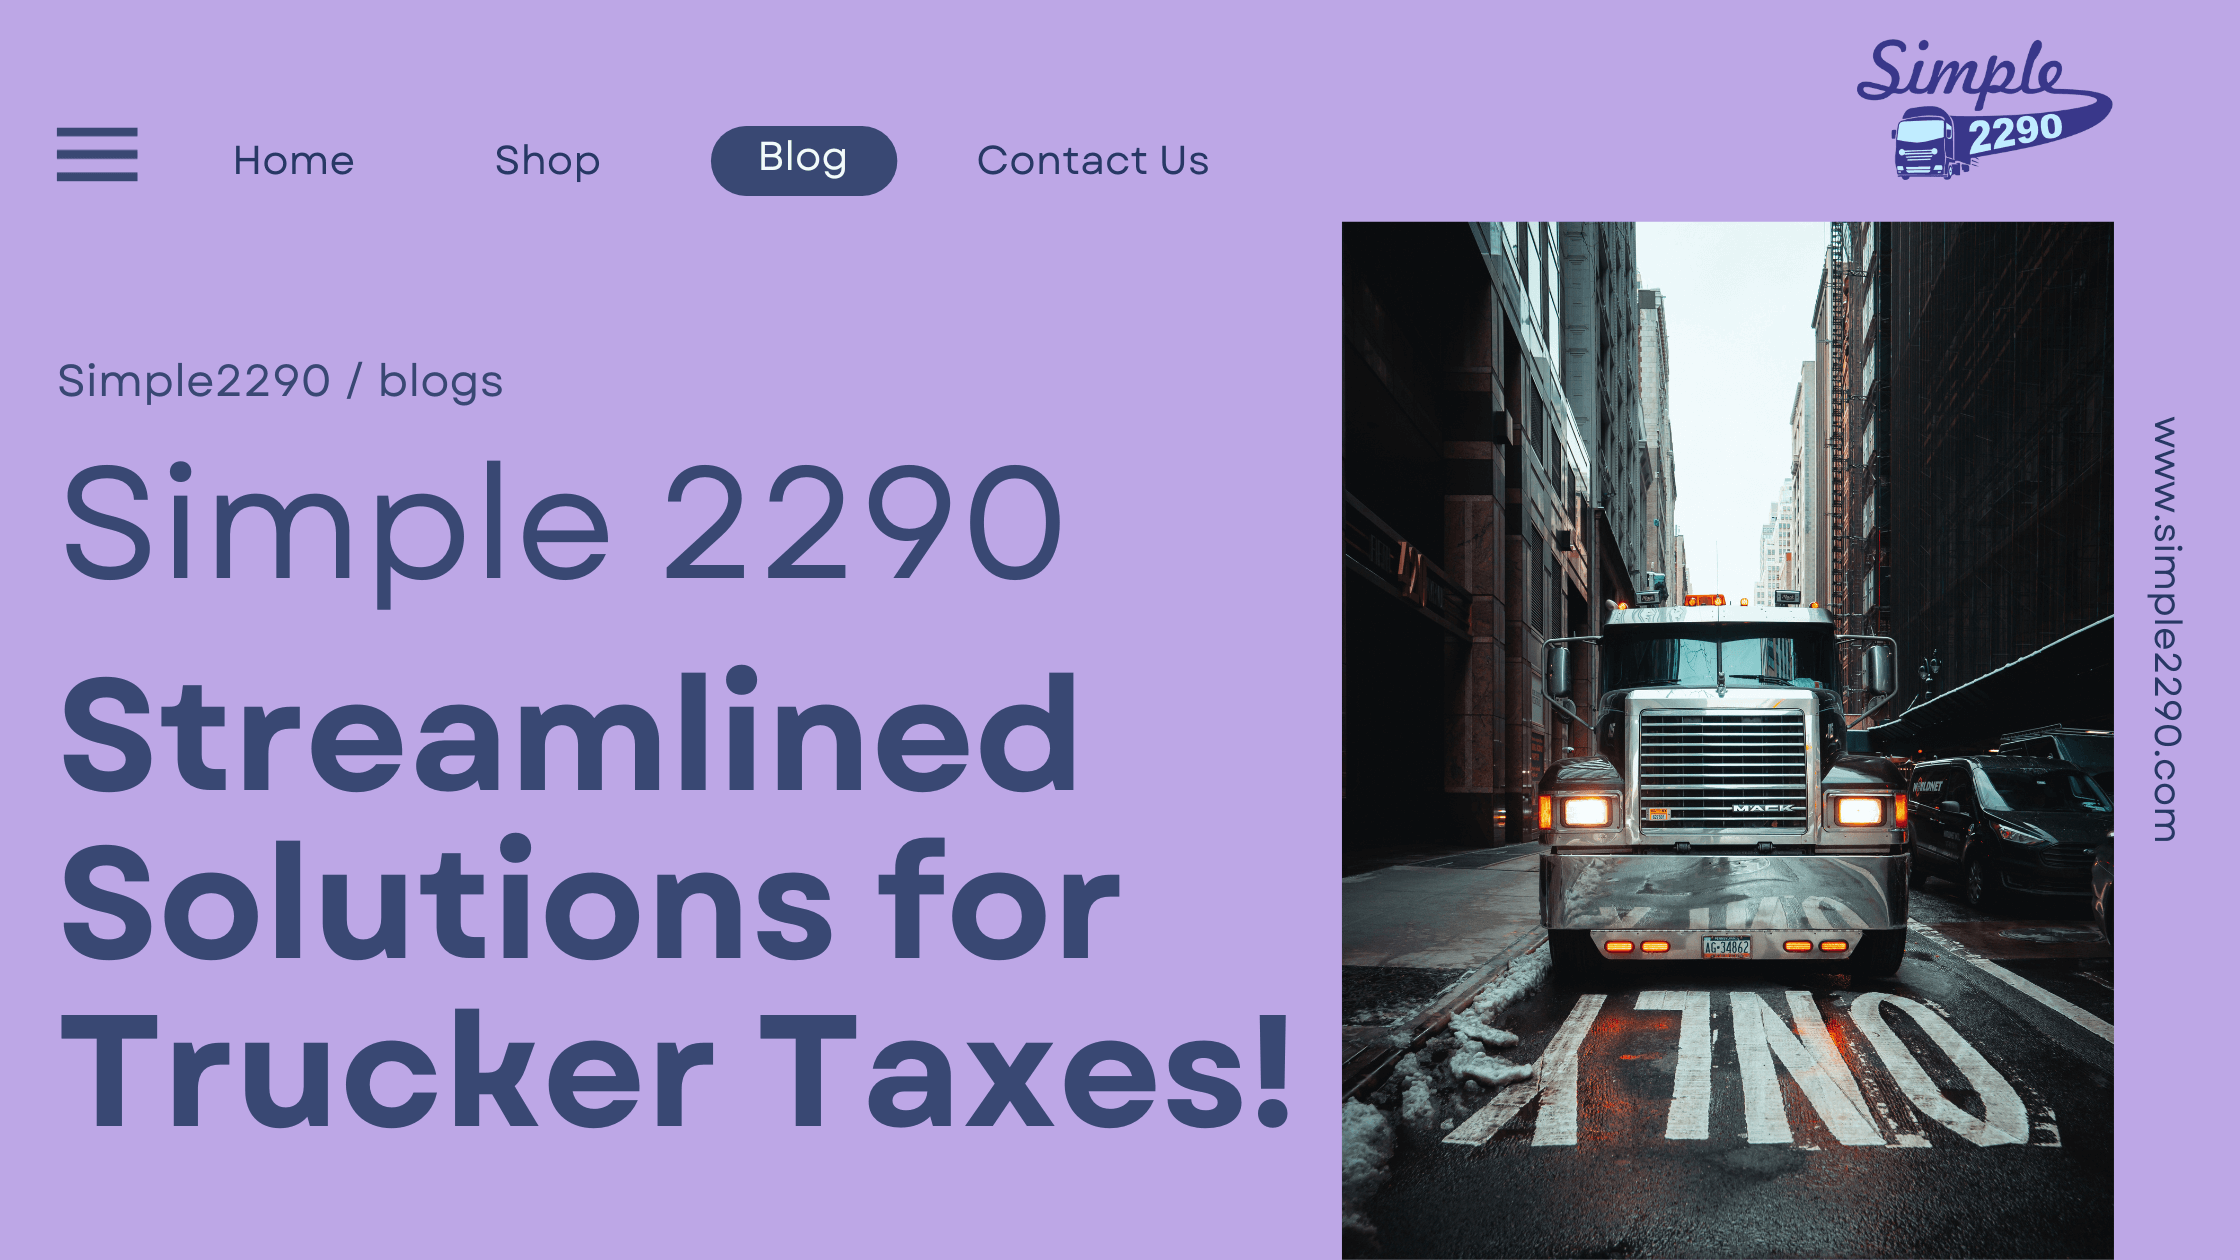 Simple 2290: Streamlined Solutions for Trucker Taxes!